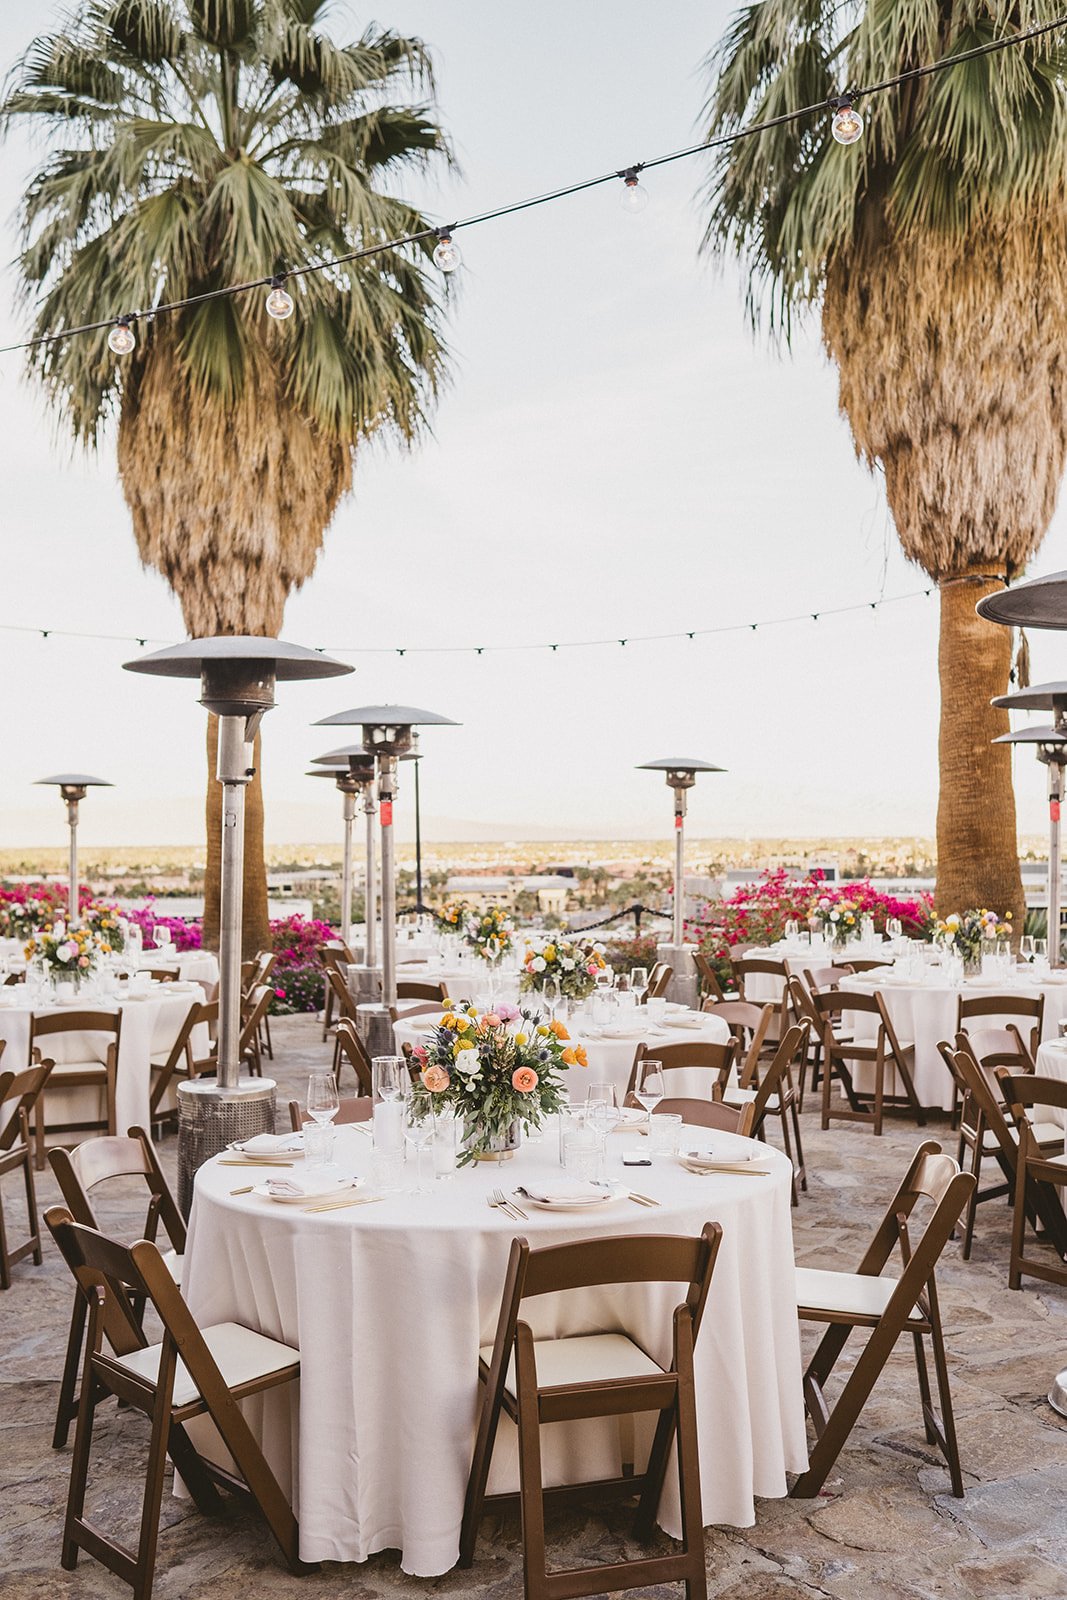 outdoor wedding reception at Palm springs